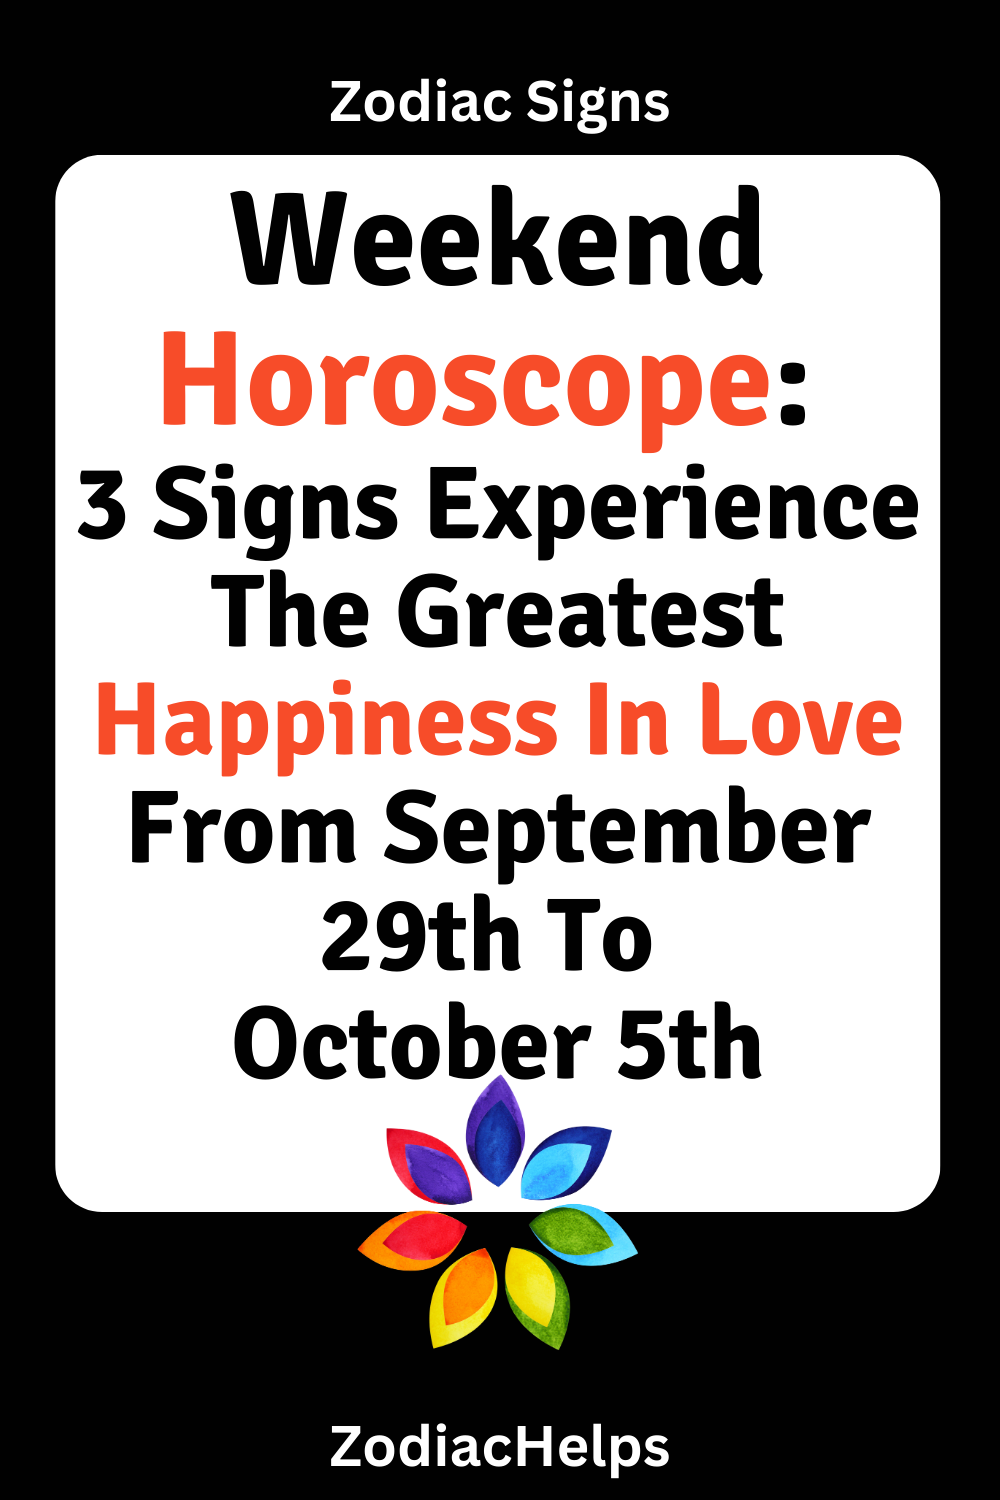 Weekend Horoscope: 3 Signs Experience The Greatest Happiness In Love From September 29th To October 5th